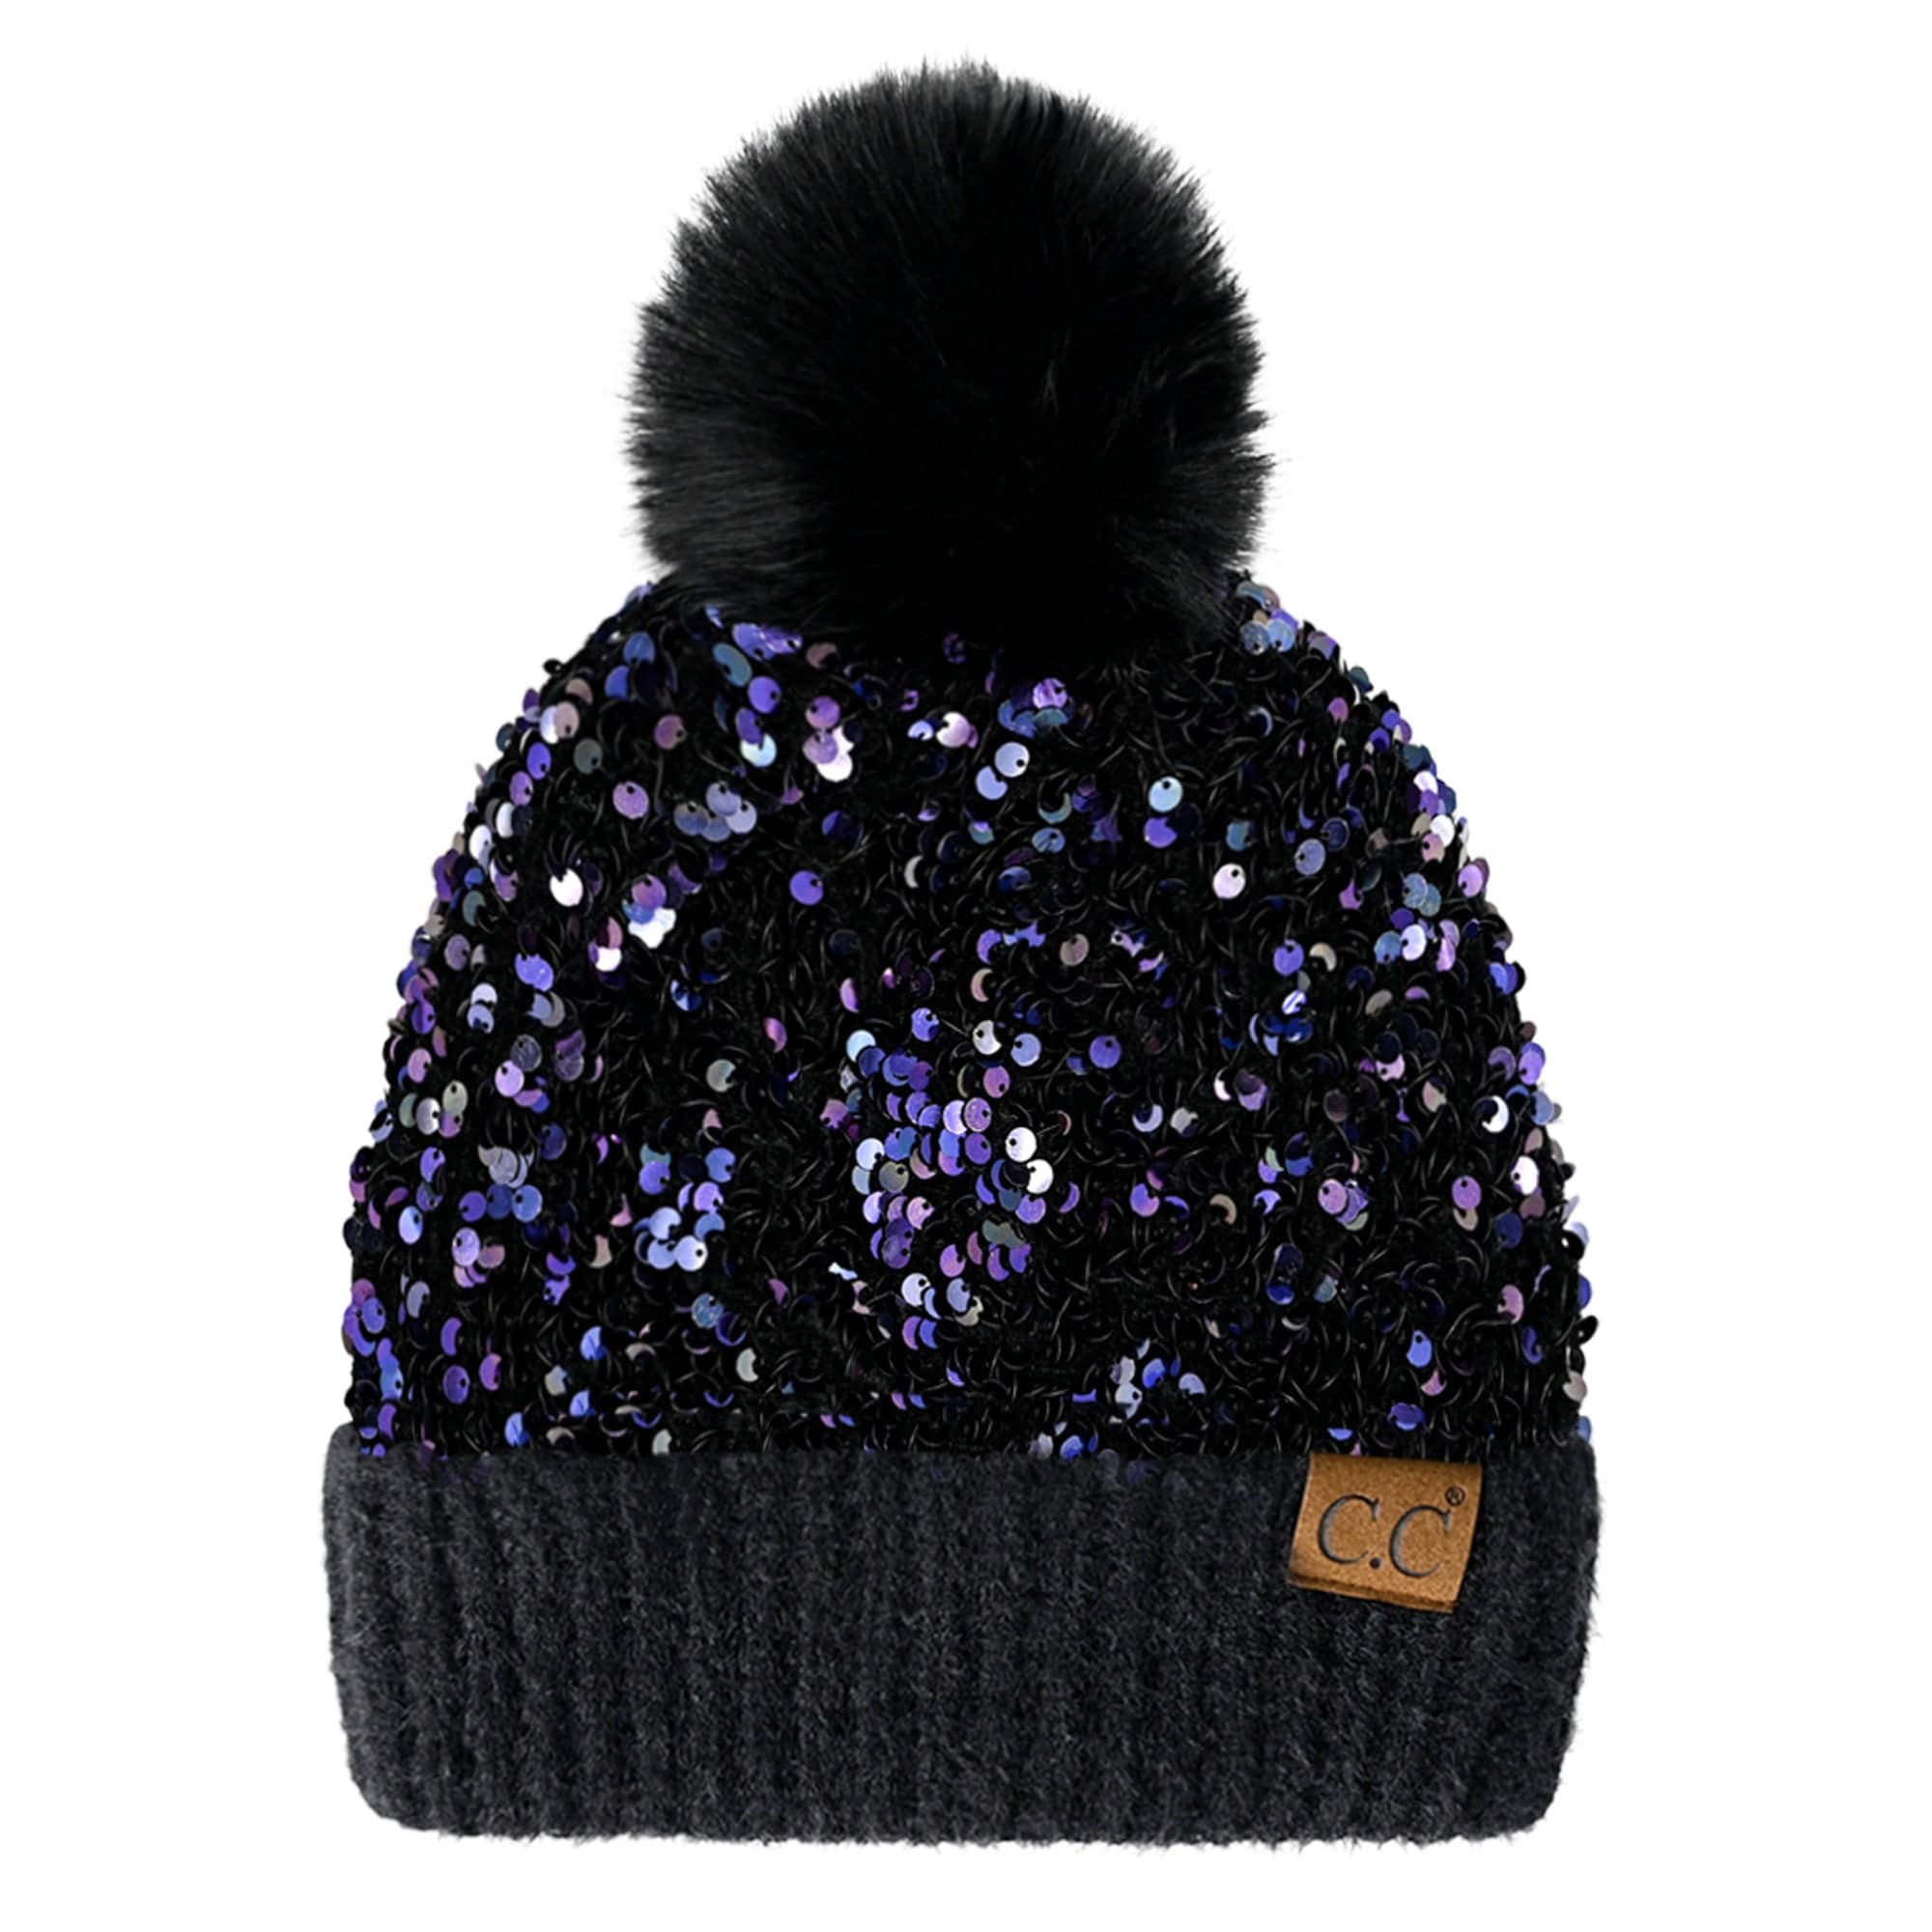 CC Sequin Fur Pom Beanie | Adult and Kid Sizes | Truly Contagious